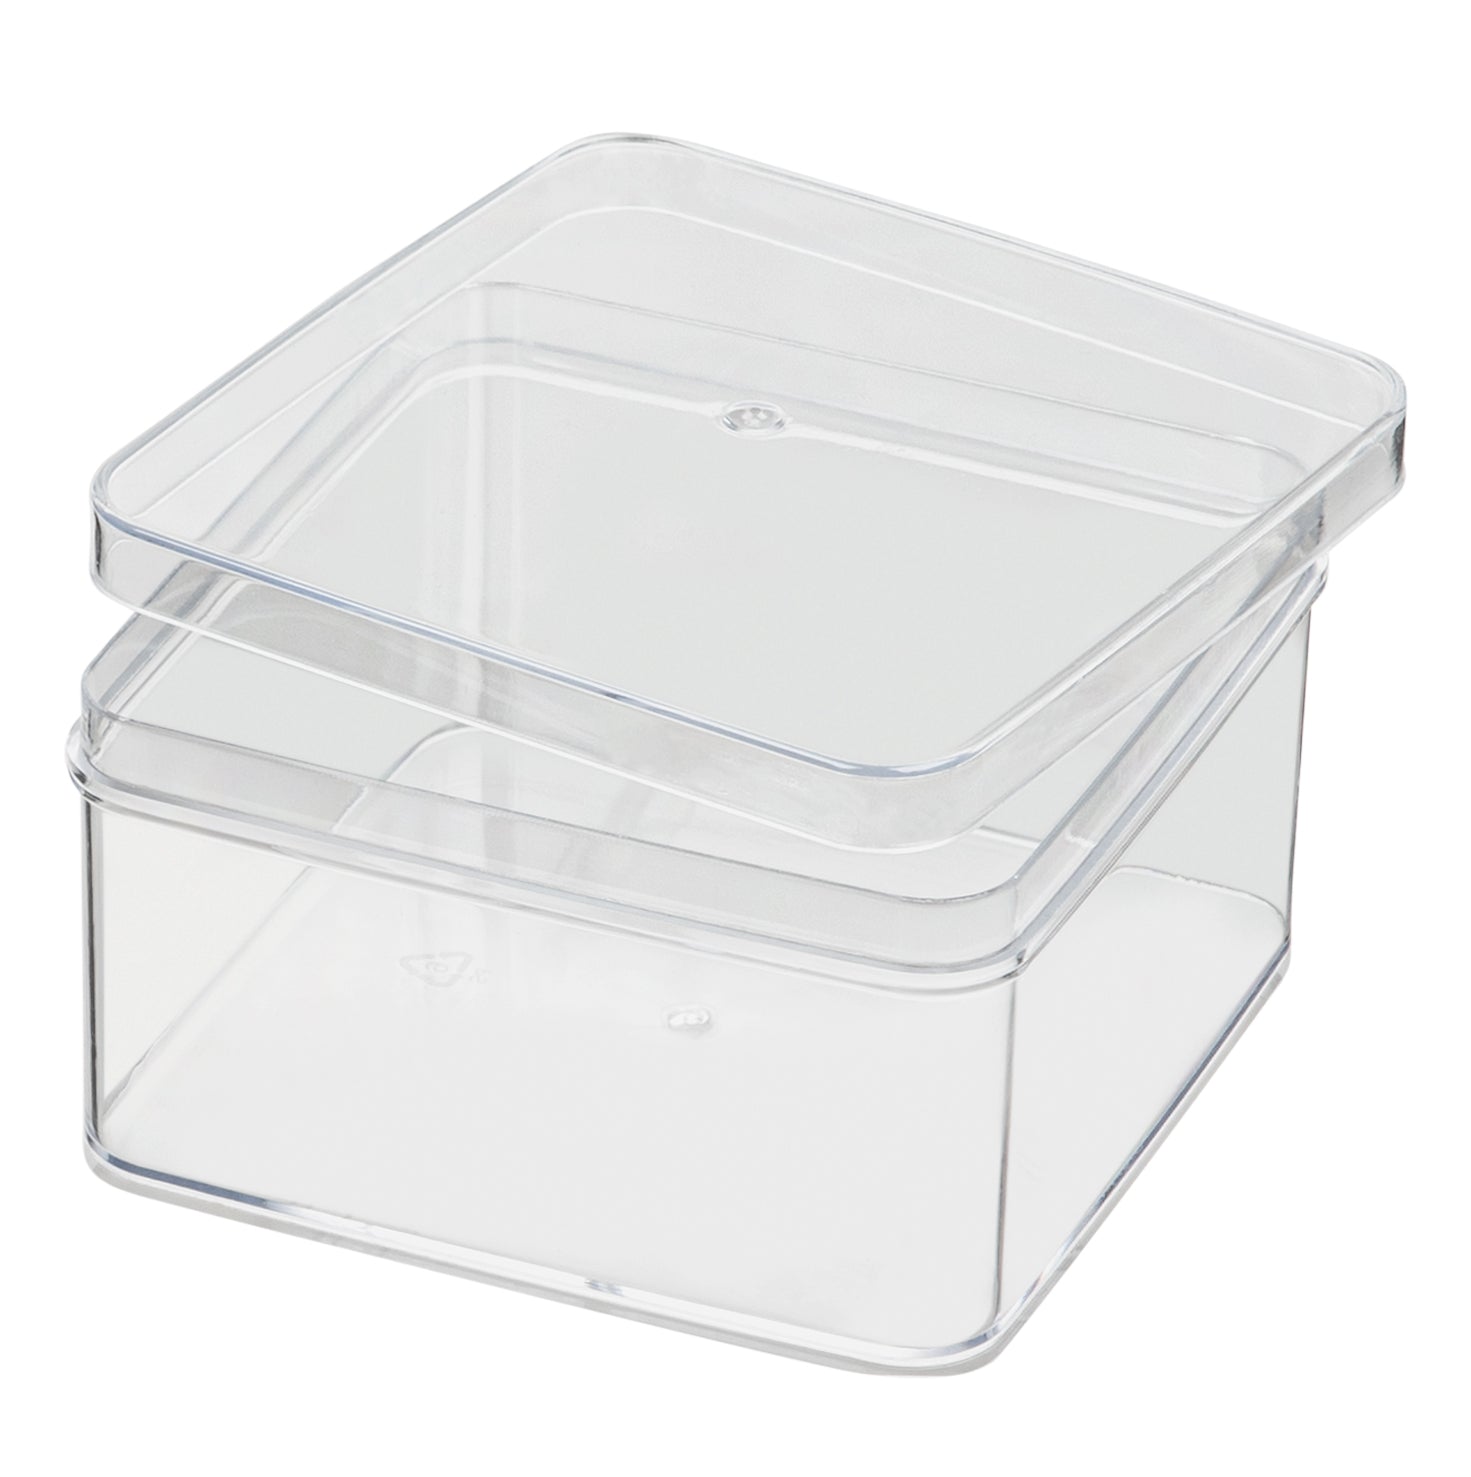 Hammont Clear Acrylic Boxes Round 4.75X2.1 16 Pack - Clear - 8 requests